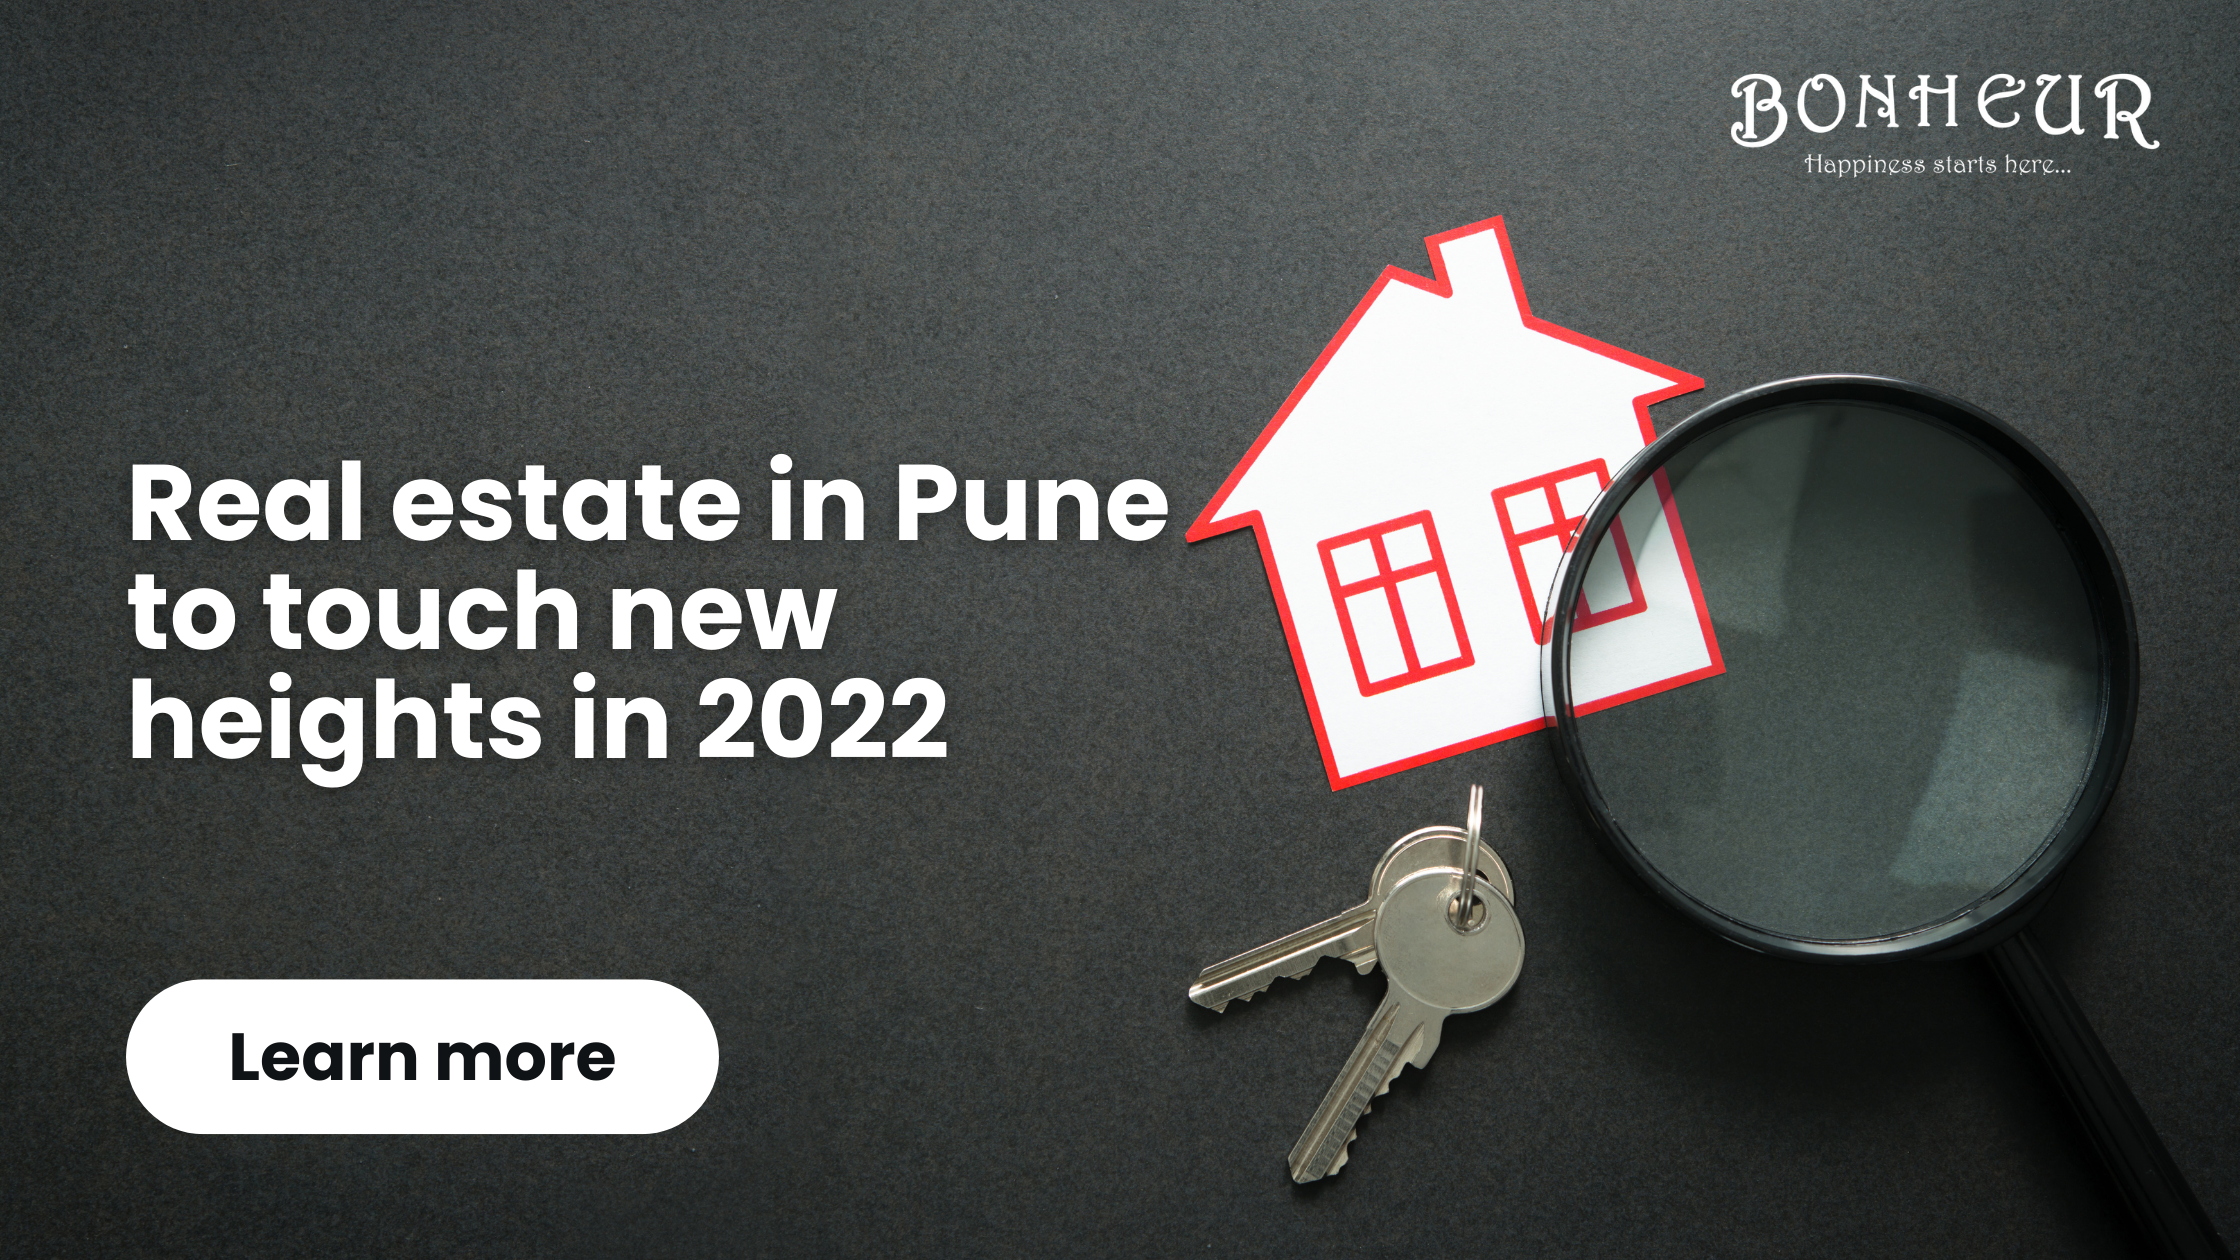 Real estate in Pune to touch new height in 2022